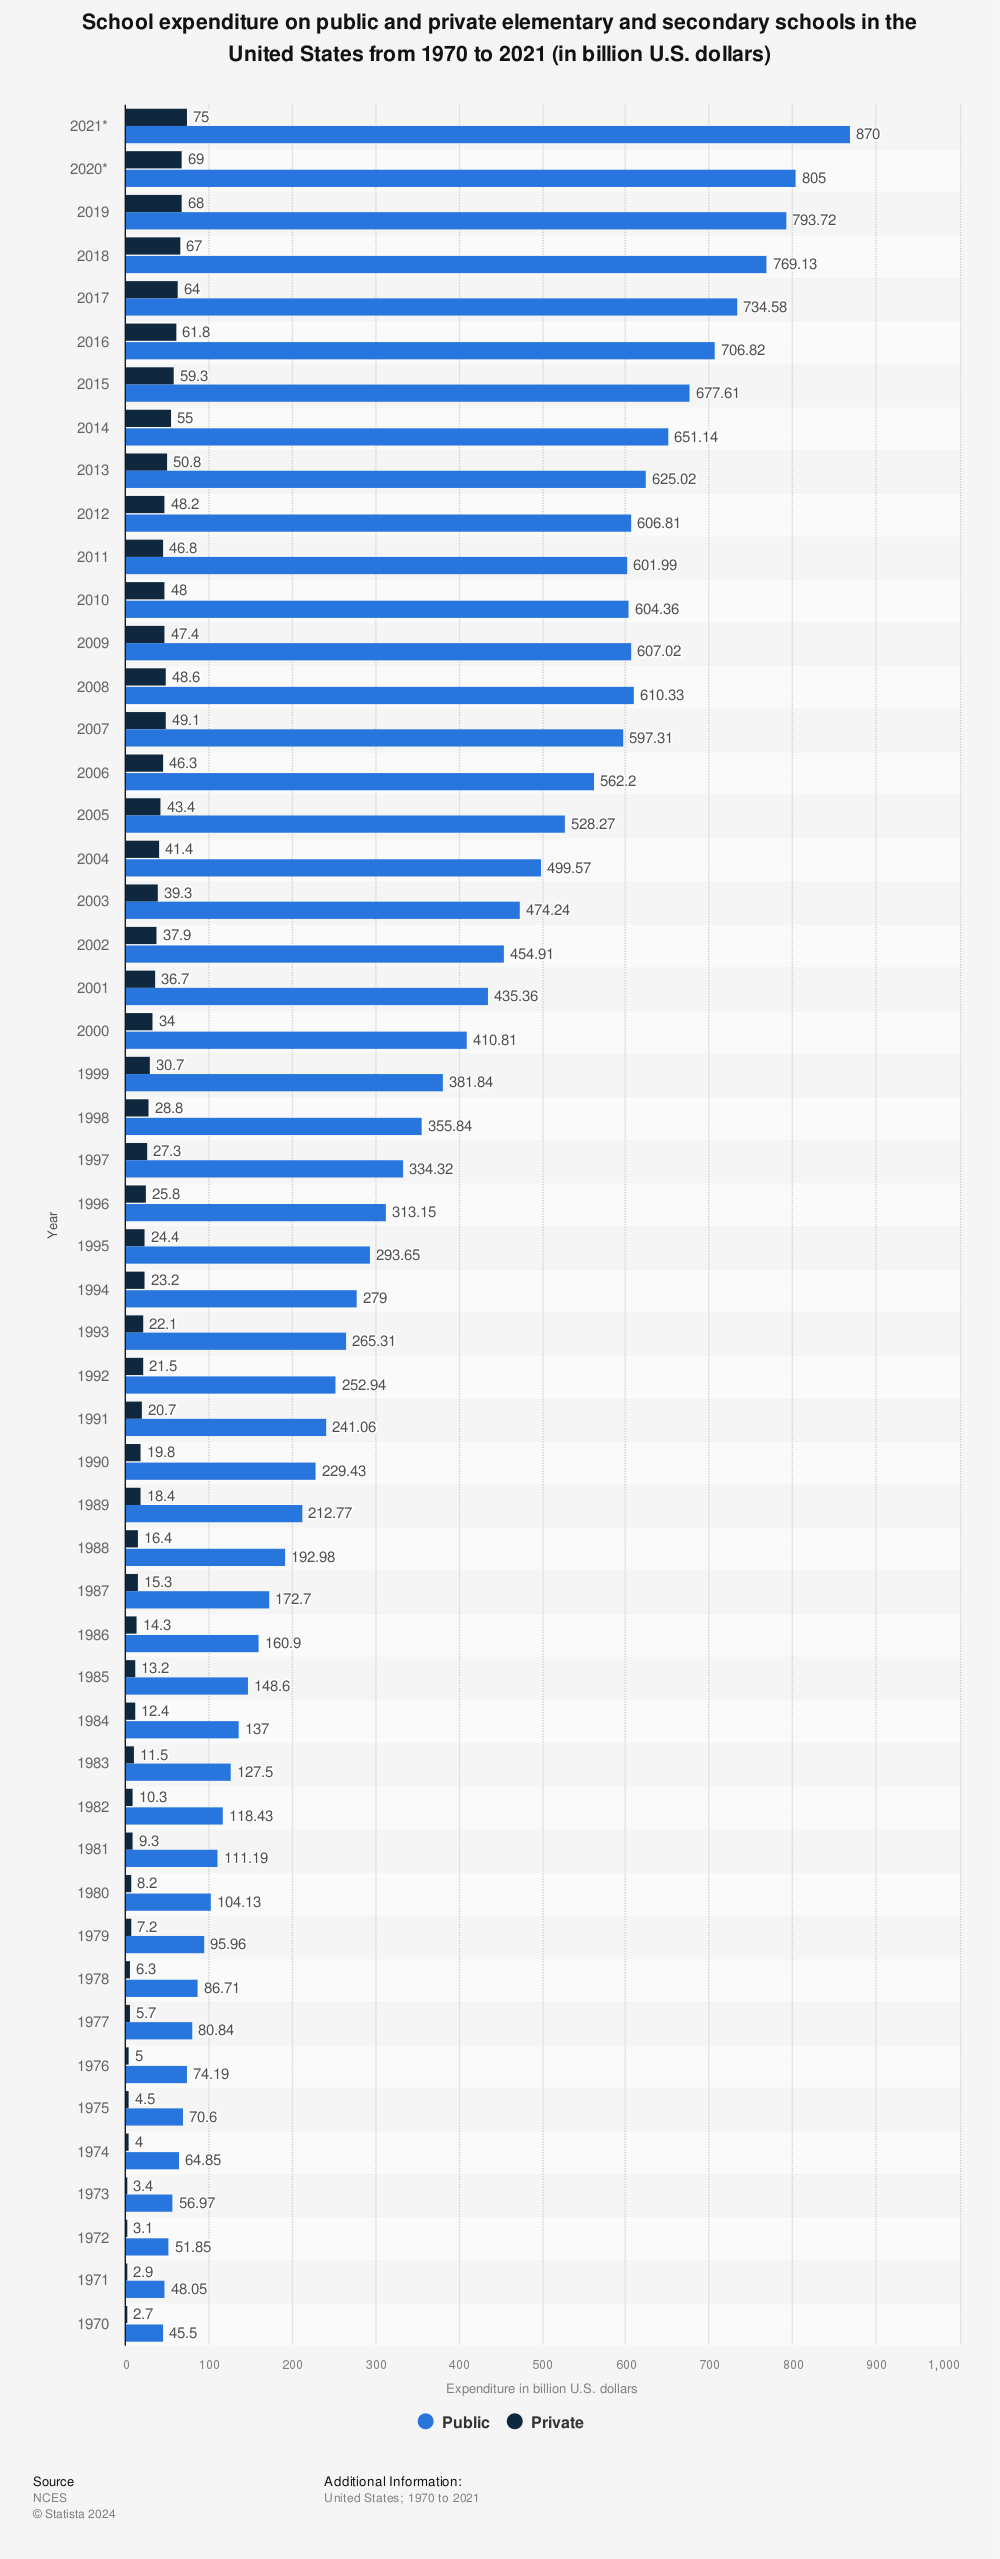 Statistic: School expenditure on public and private elementary and secondary schools in the United States from 1960 to 2019 (in billion U.S. dollars) | Statista